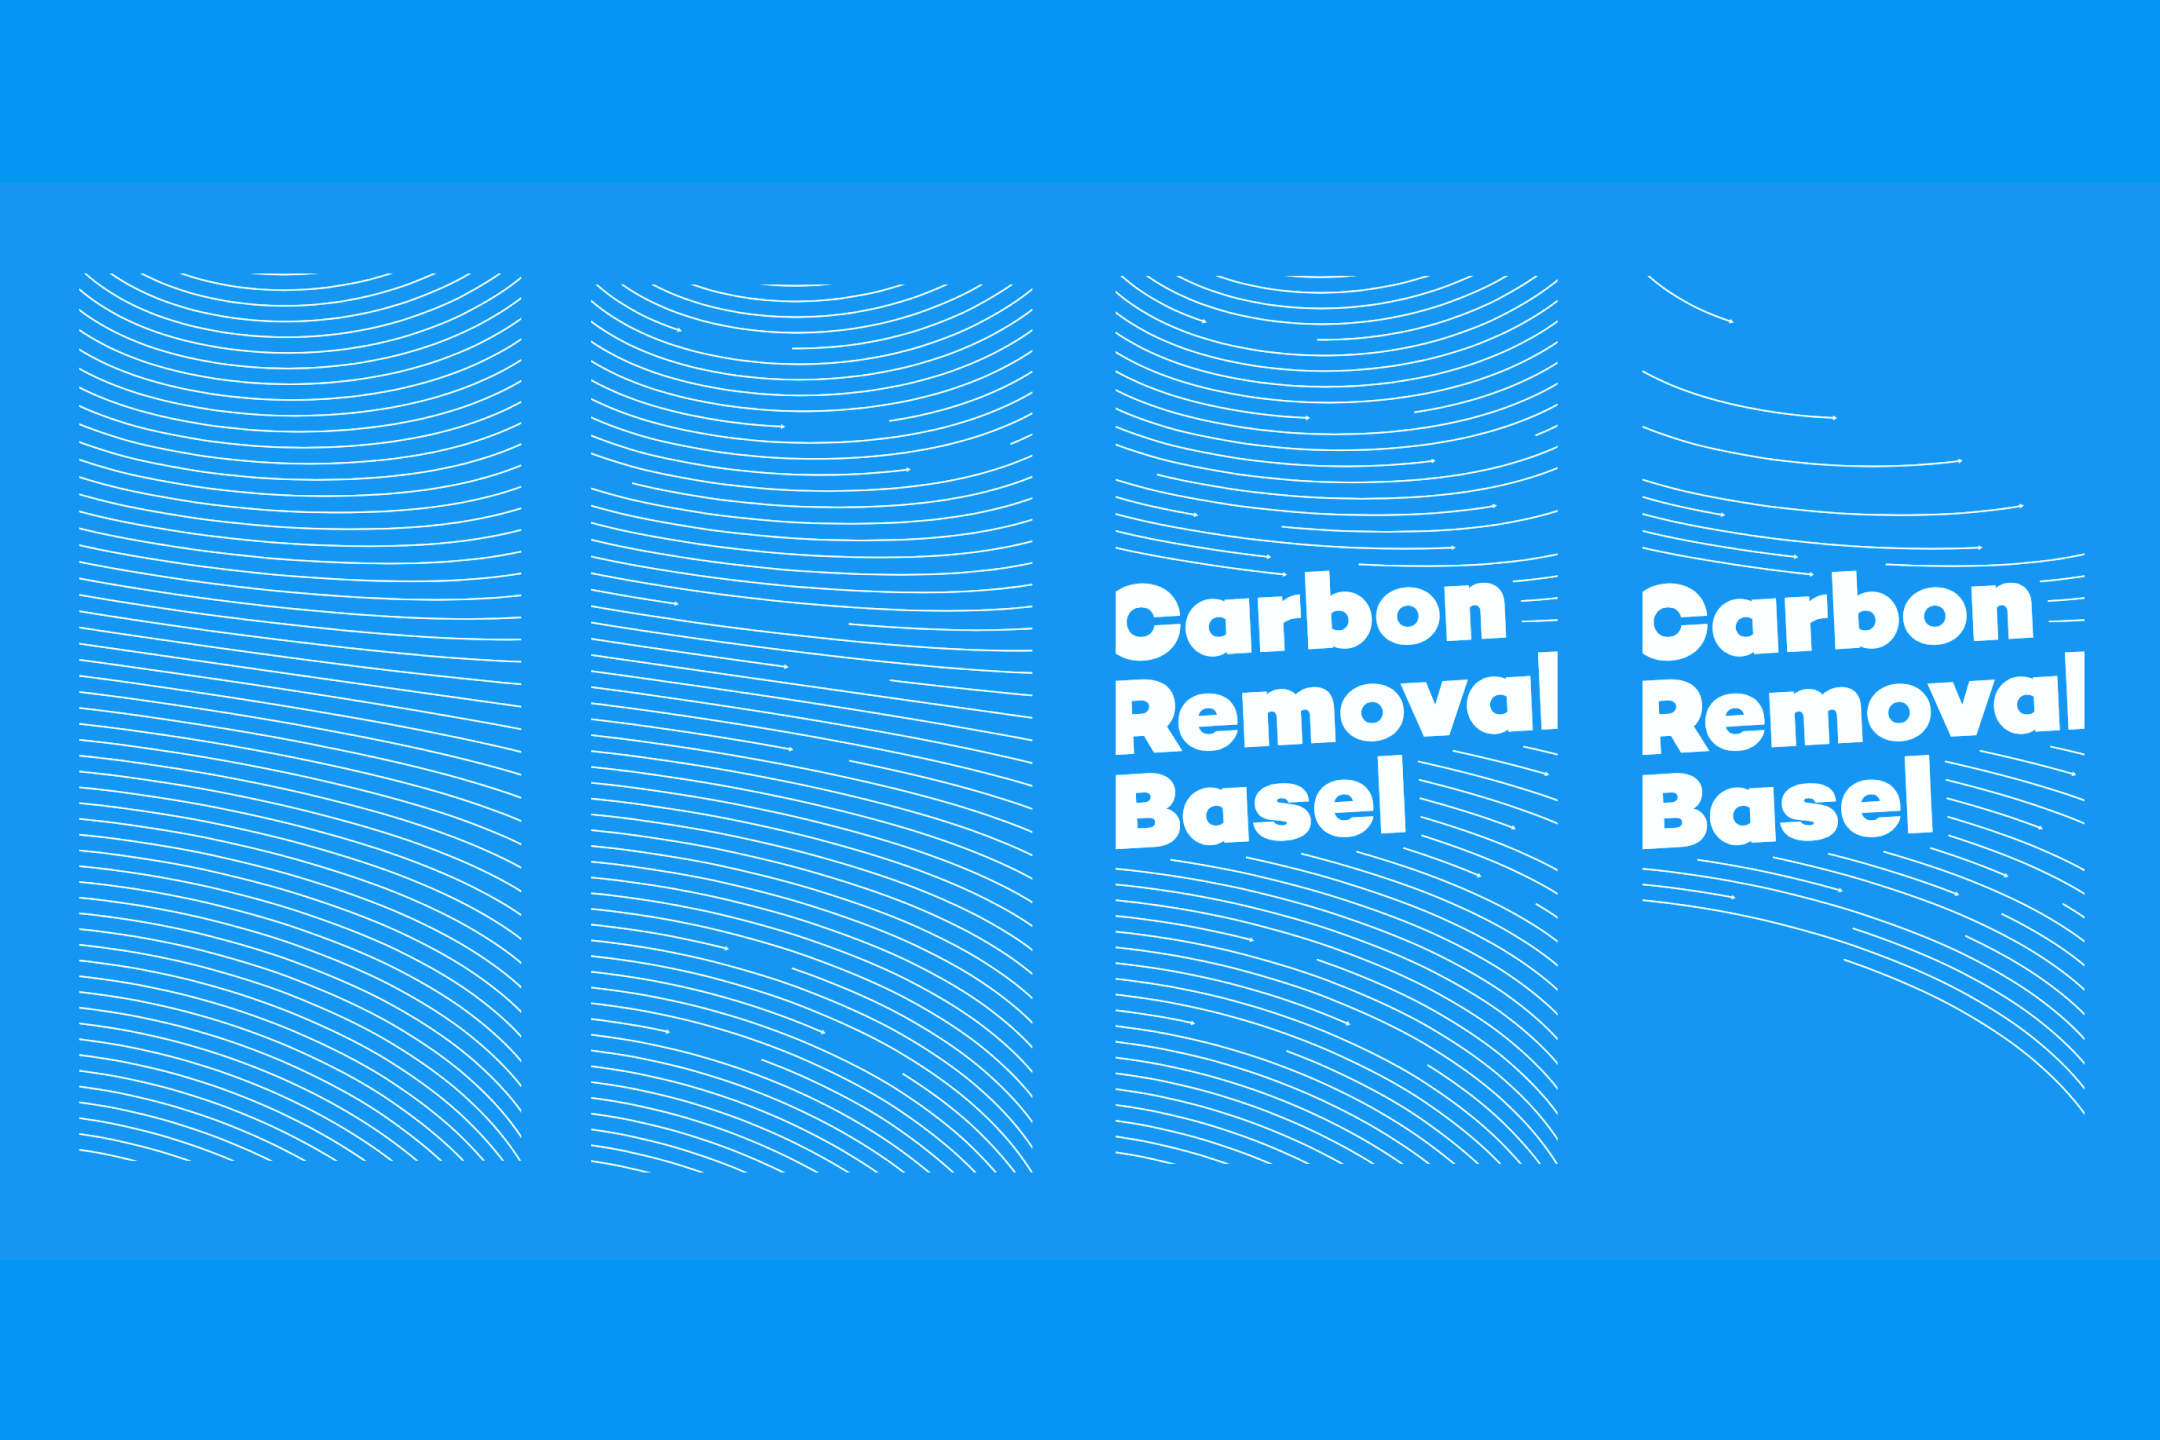 Carbon removal basel keyvisual